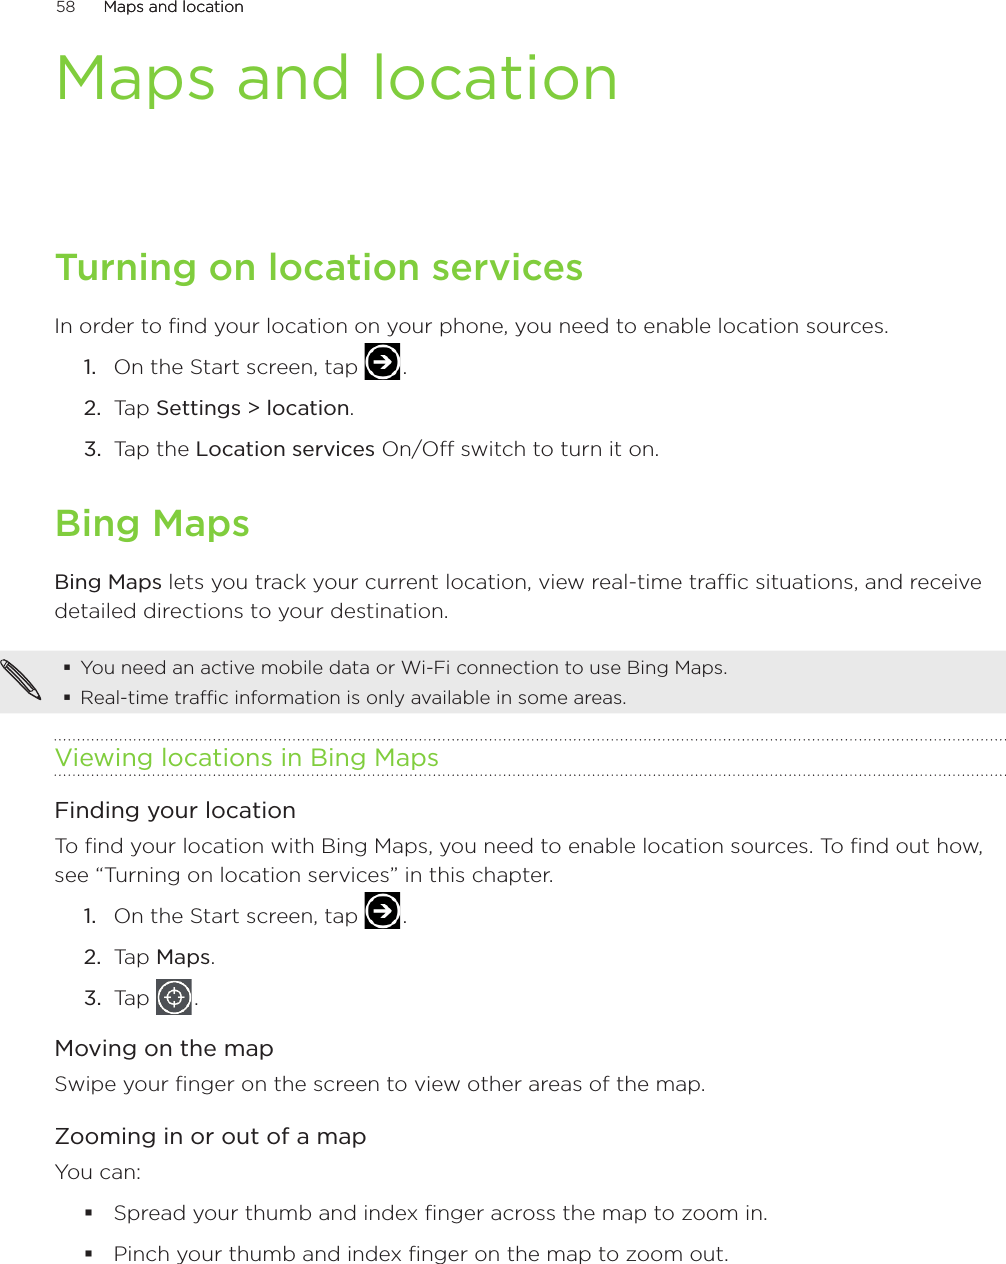 58      Maps and locationMaps and location      Maps and locationTurning on location servicesIn order to find your location on your phone, you need to enable location sources.On the Start screen, tap   .Tap Settings &gt; location.Tap the Location services On/Off switch to turn it on. Bing MapsBing Maps lets you track your current location, view real-time traffic situations, and receive detailed directions to your destination. You need an active mobile data or Wi-Fi connection to use Bing Maps.Real-time traffic information is only available in some areas.Viewing locations in Bing MapsFinding your locationTo find your location with Bing Maps, you need to enable location sources. To find out how, see “Turning on location services” in this chapter.On the Start screen, tap   .Tap Maps.Tap   .Moving on the mapSwipe your finger on the screen to view other areas of the map.Zooming in or out of a mapYou can:Spread your thumb and index finger across the map to zoom in.Pinch your thumb and index finger on the map to zoom out.1.2.3.1.2.3.